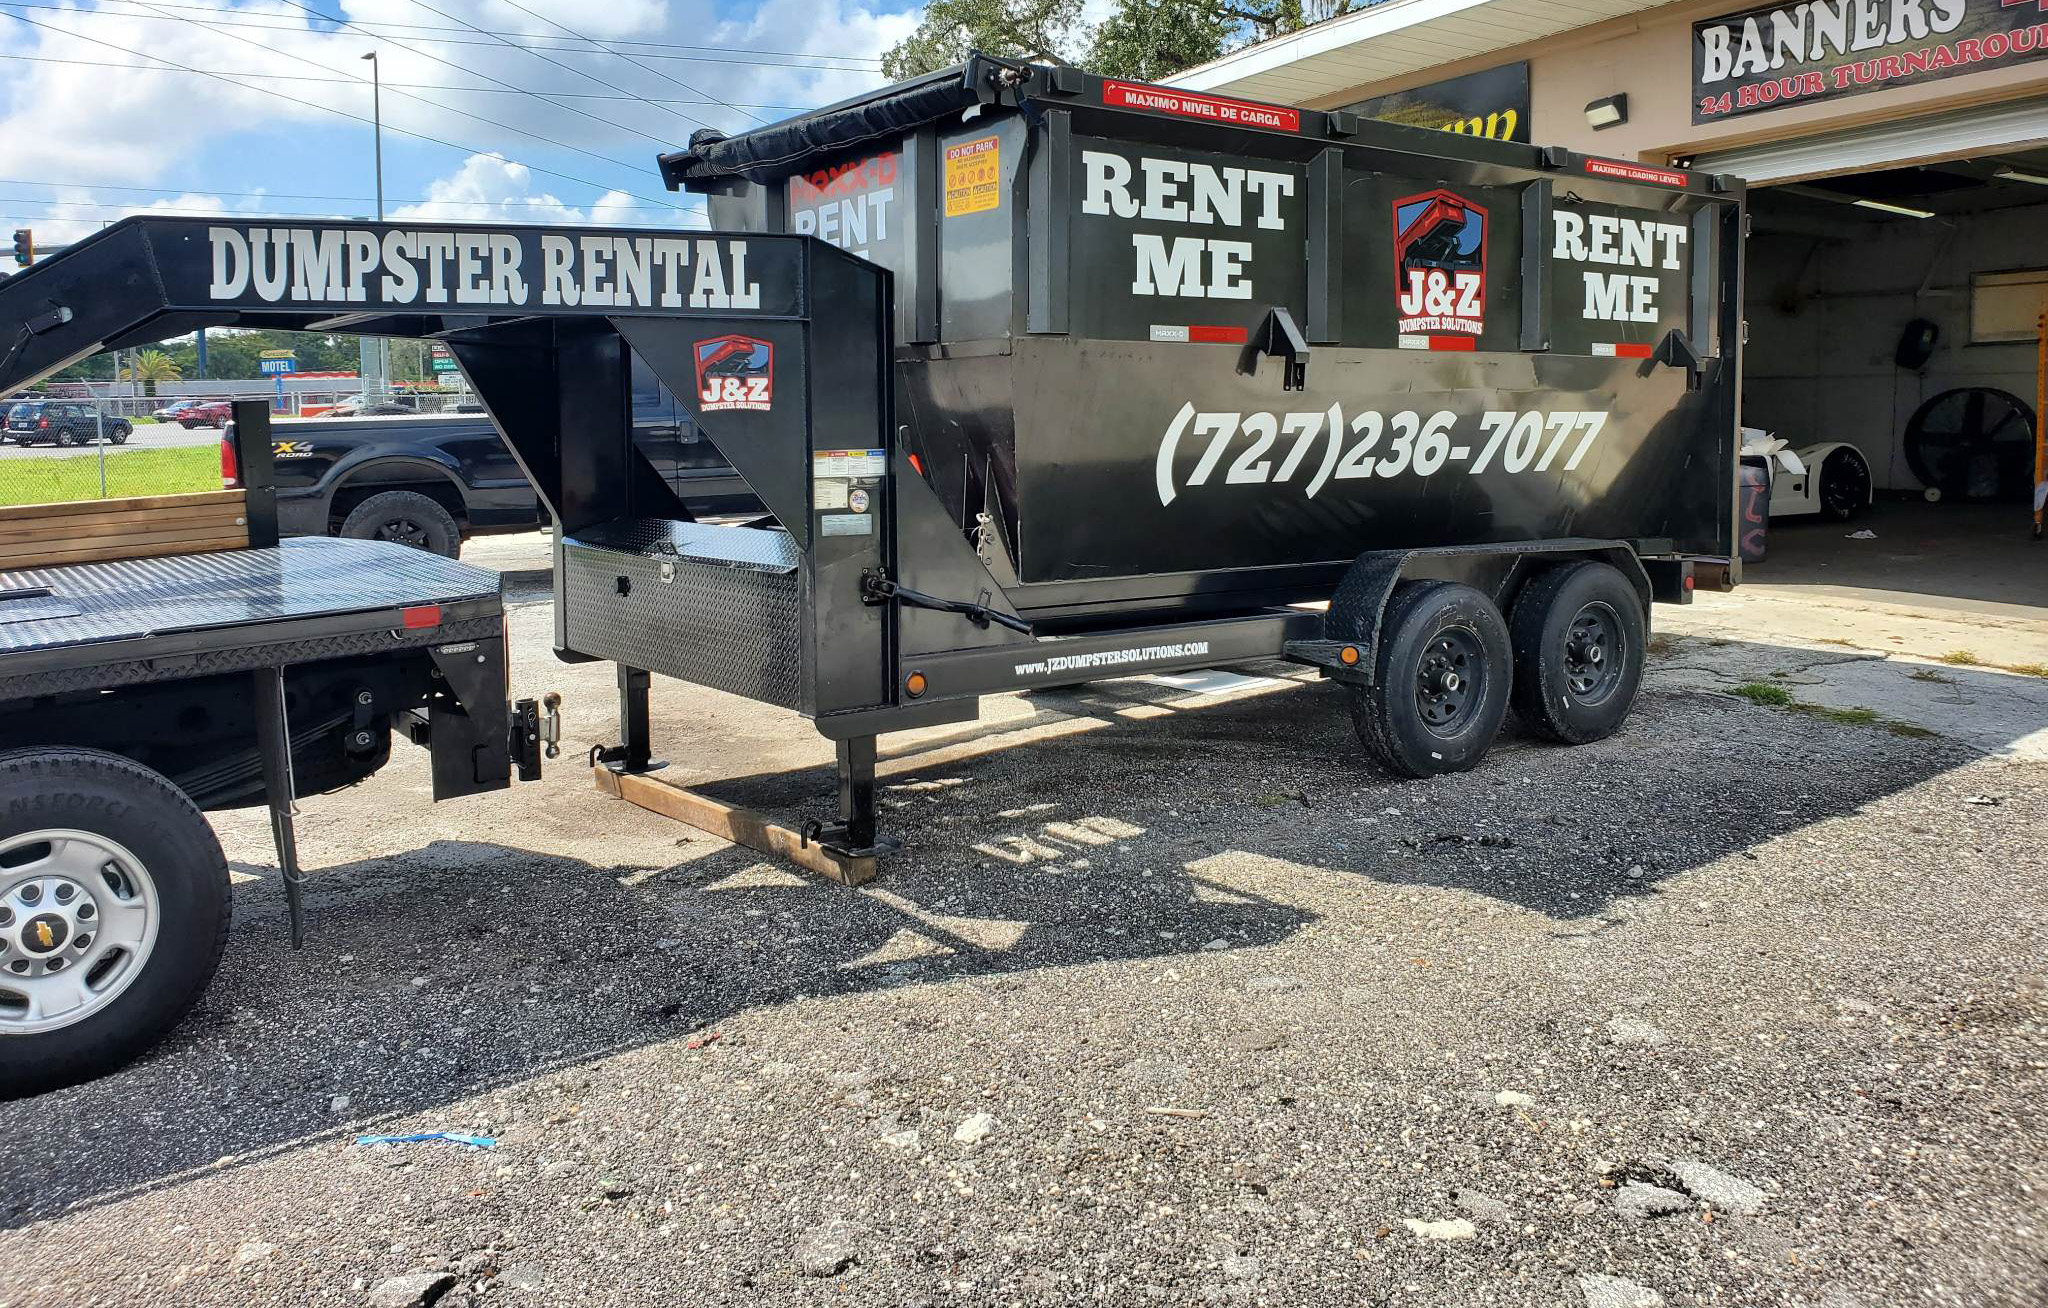 Residential Dumpster Rental Odessa FL Homeowners Use for Renovations and Cleanouts